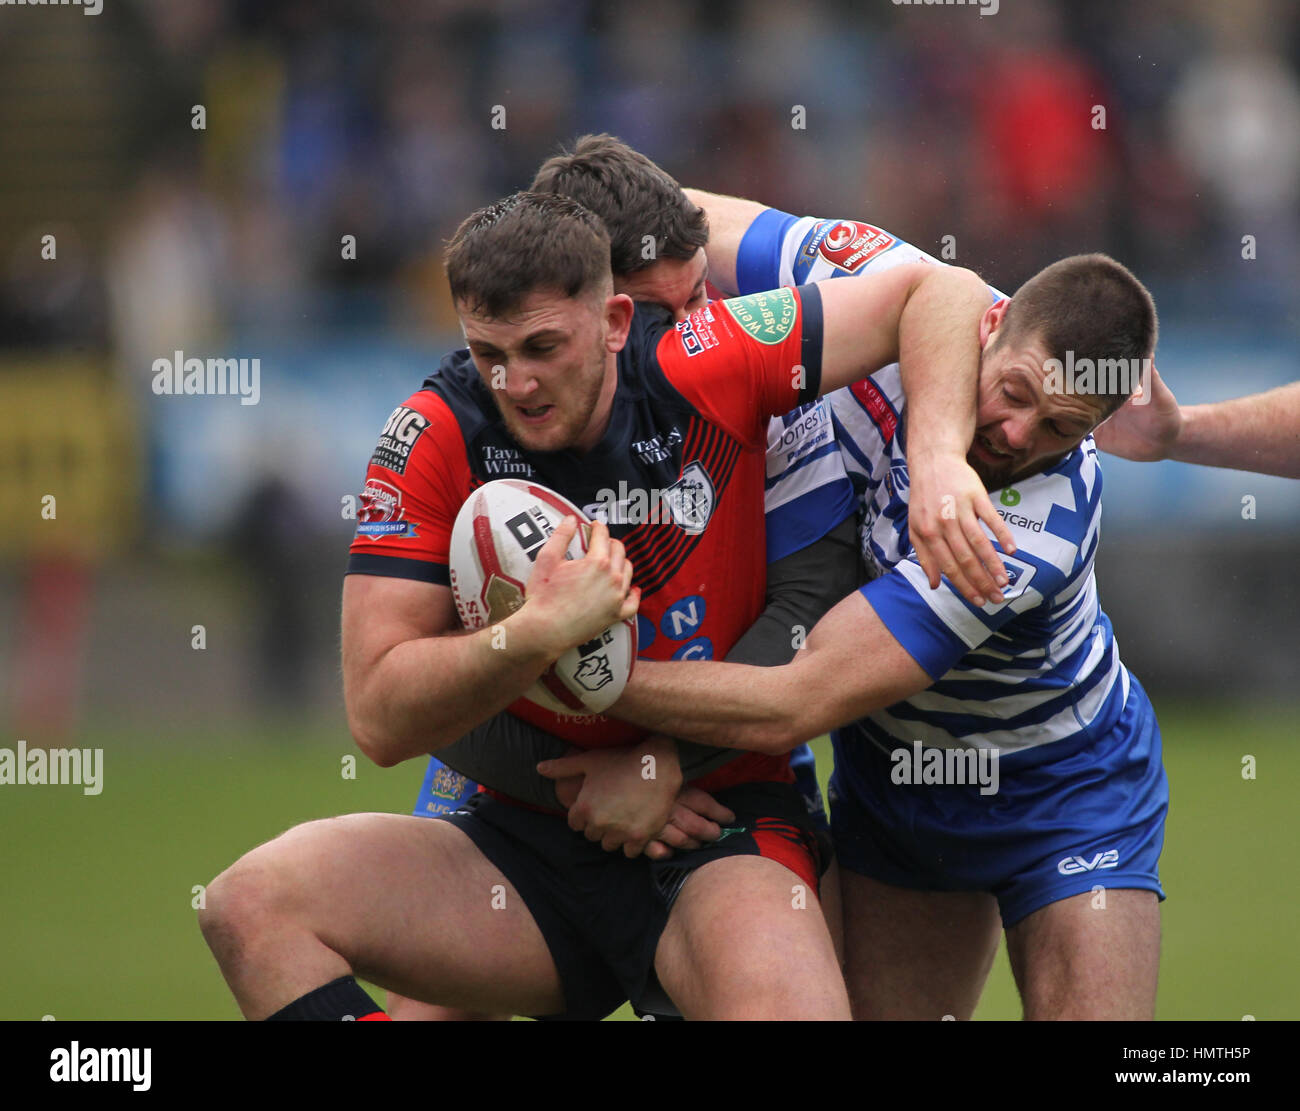 The Shay Stadium, UK. 05th Feb, 2017. The Shay Stadium, Halifax, West Yorkshire 5th February 2017. Halifax v Featherstone Rovers Jordan Baldwinson (C) of Featherstone Rovers tackled by Scott Murrell and Ben Heaton of Halifax RLFC during the Rugby League Championship 2017 Round 1 at the The Shay Stadium, Halifax. Picture by Credit: Stephen Gaunt/Touchlinepics.com/Alamy Live News Stock Photo